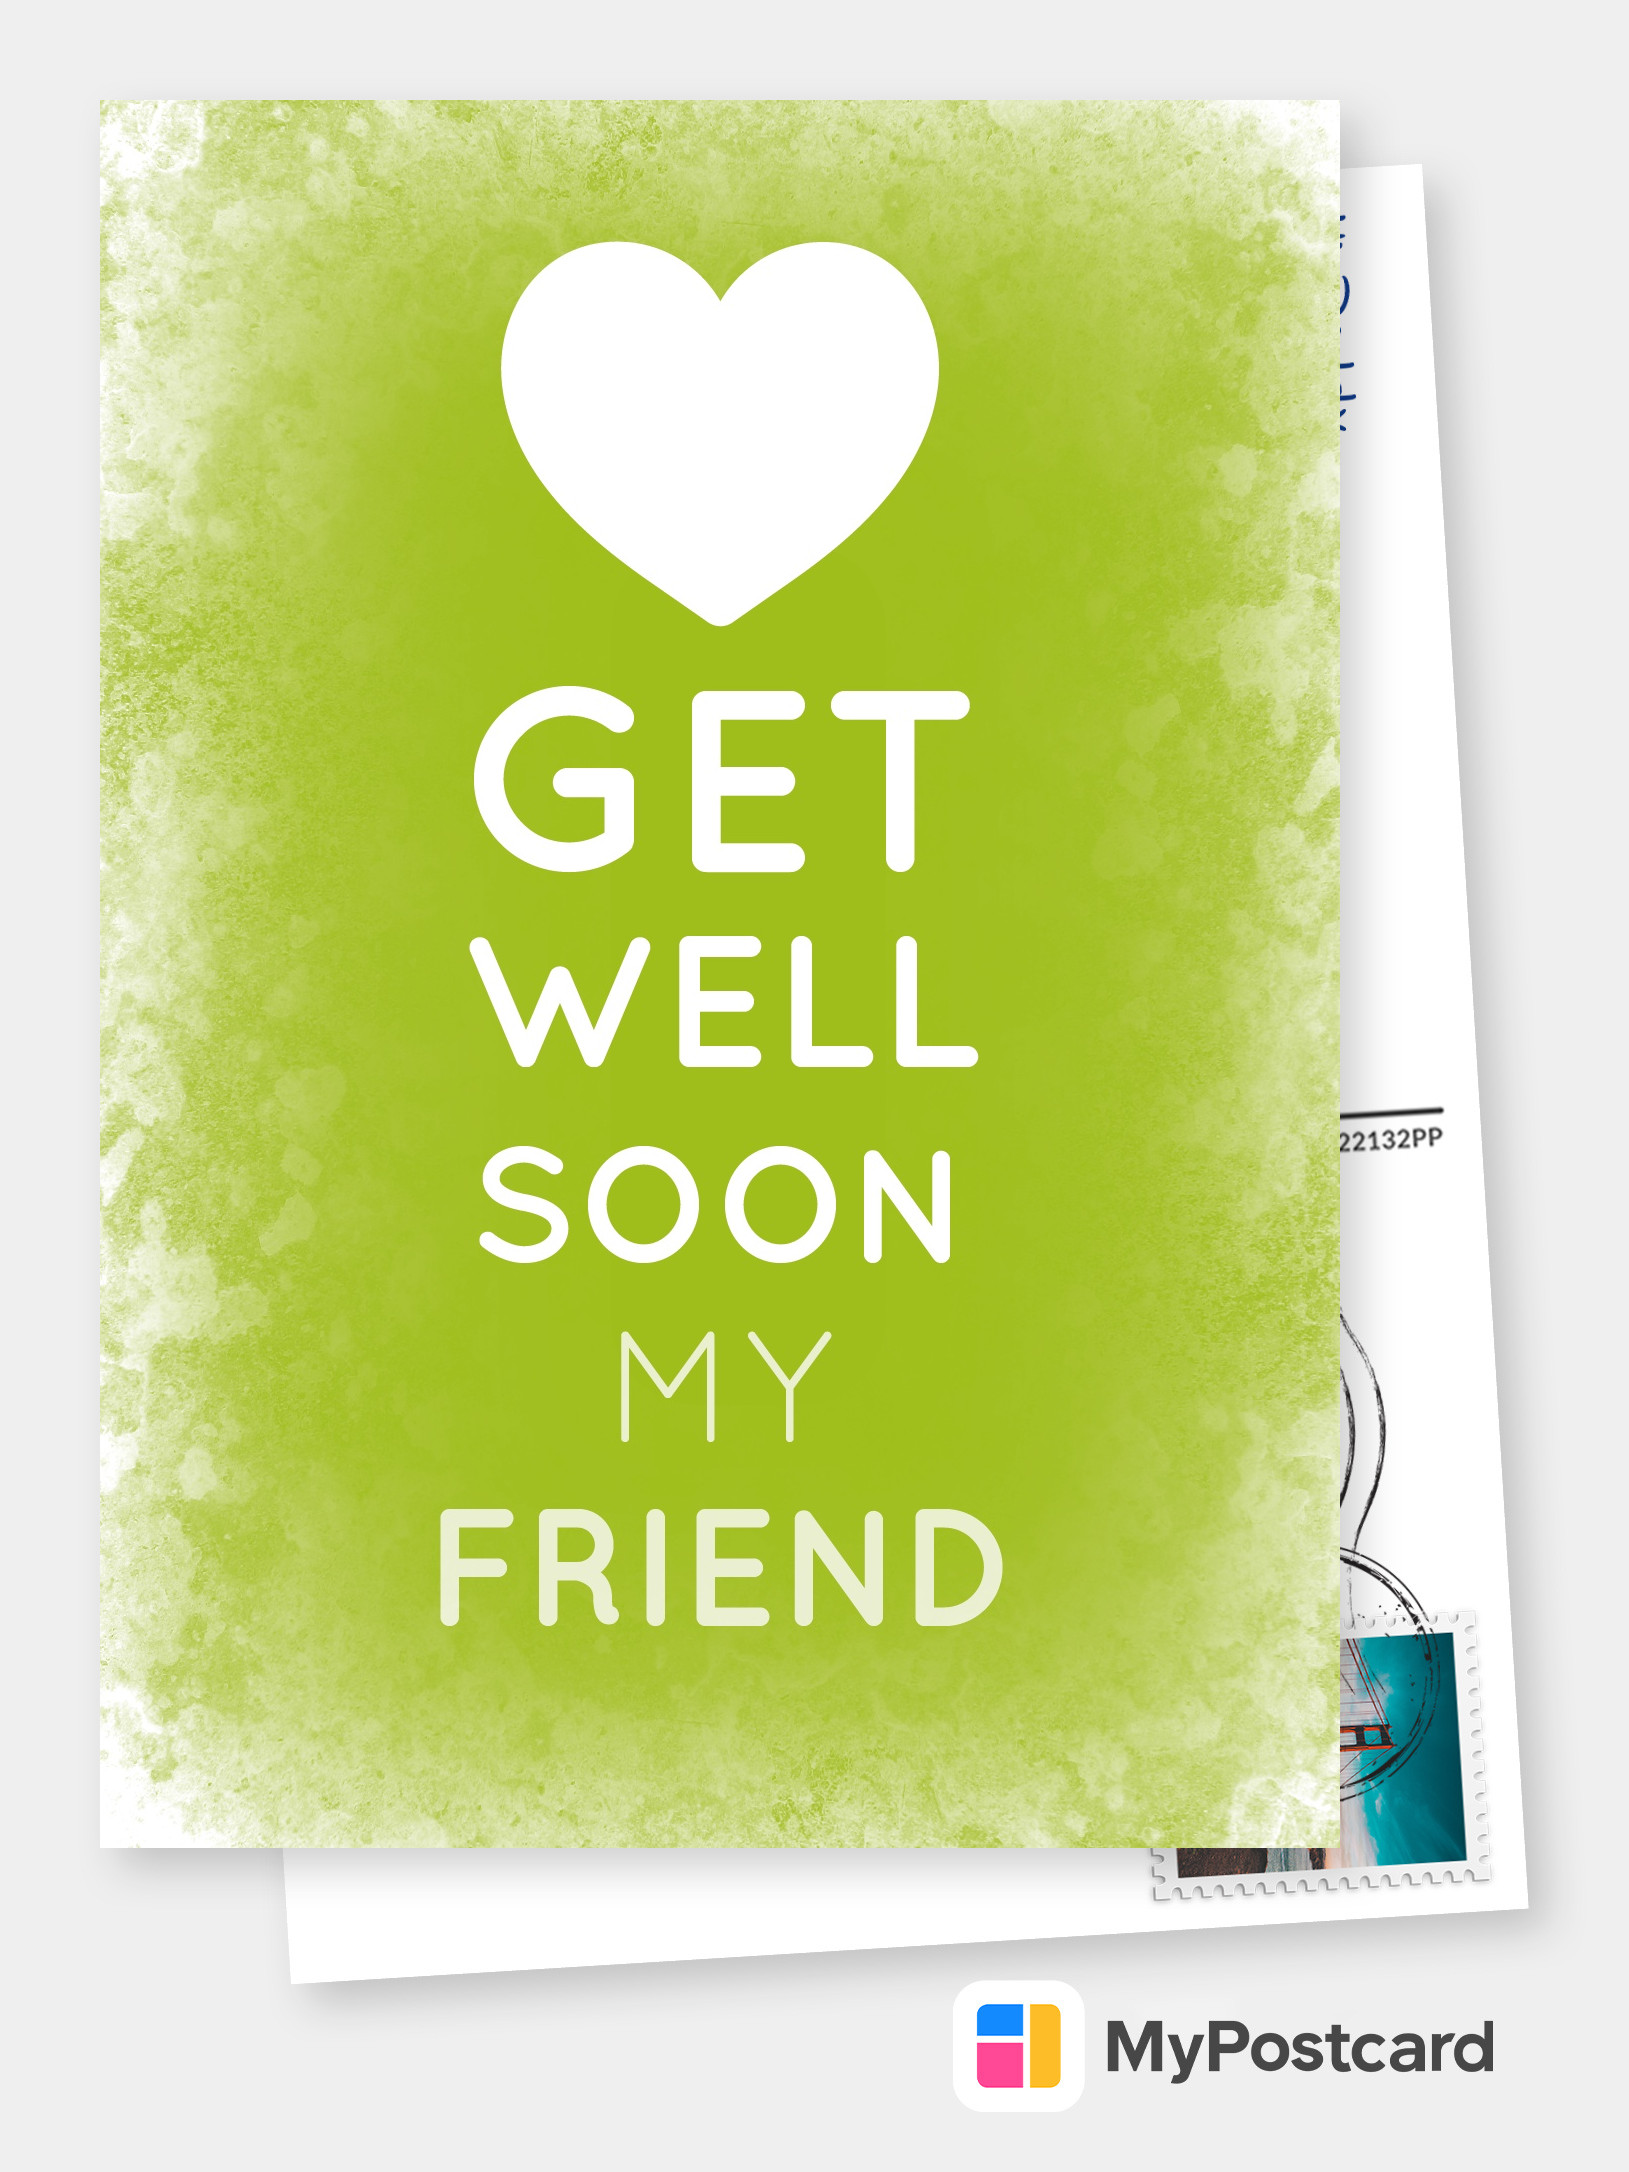 Create Your Own Get well soon Cards  Free Printable Templates  Printed &  Mailed For You  Send Your Get well soon Cards Online  Free shipping Within Get Well Soon Card Template